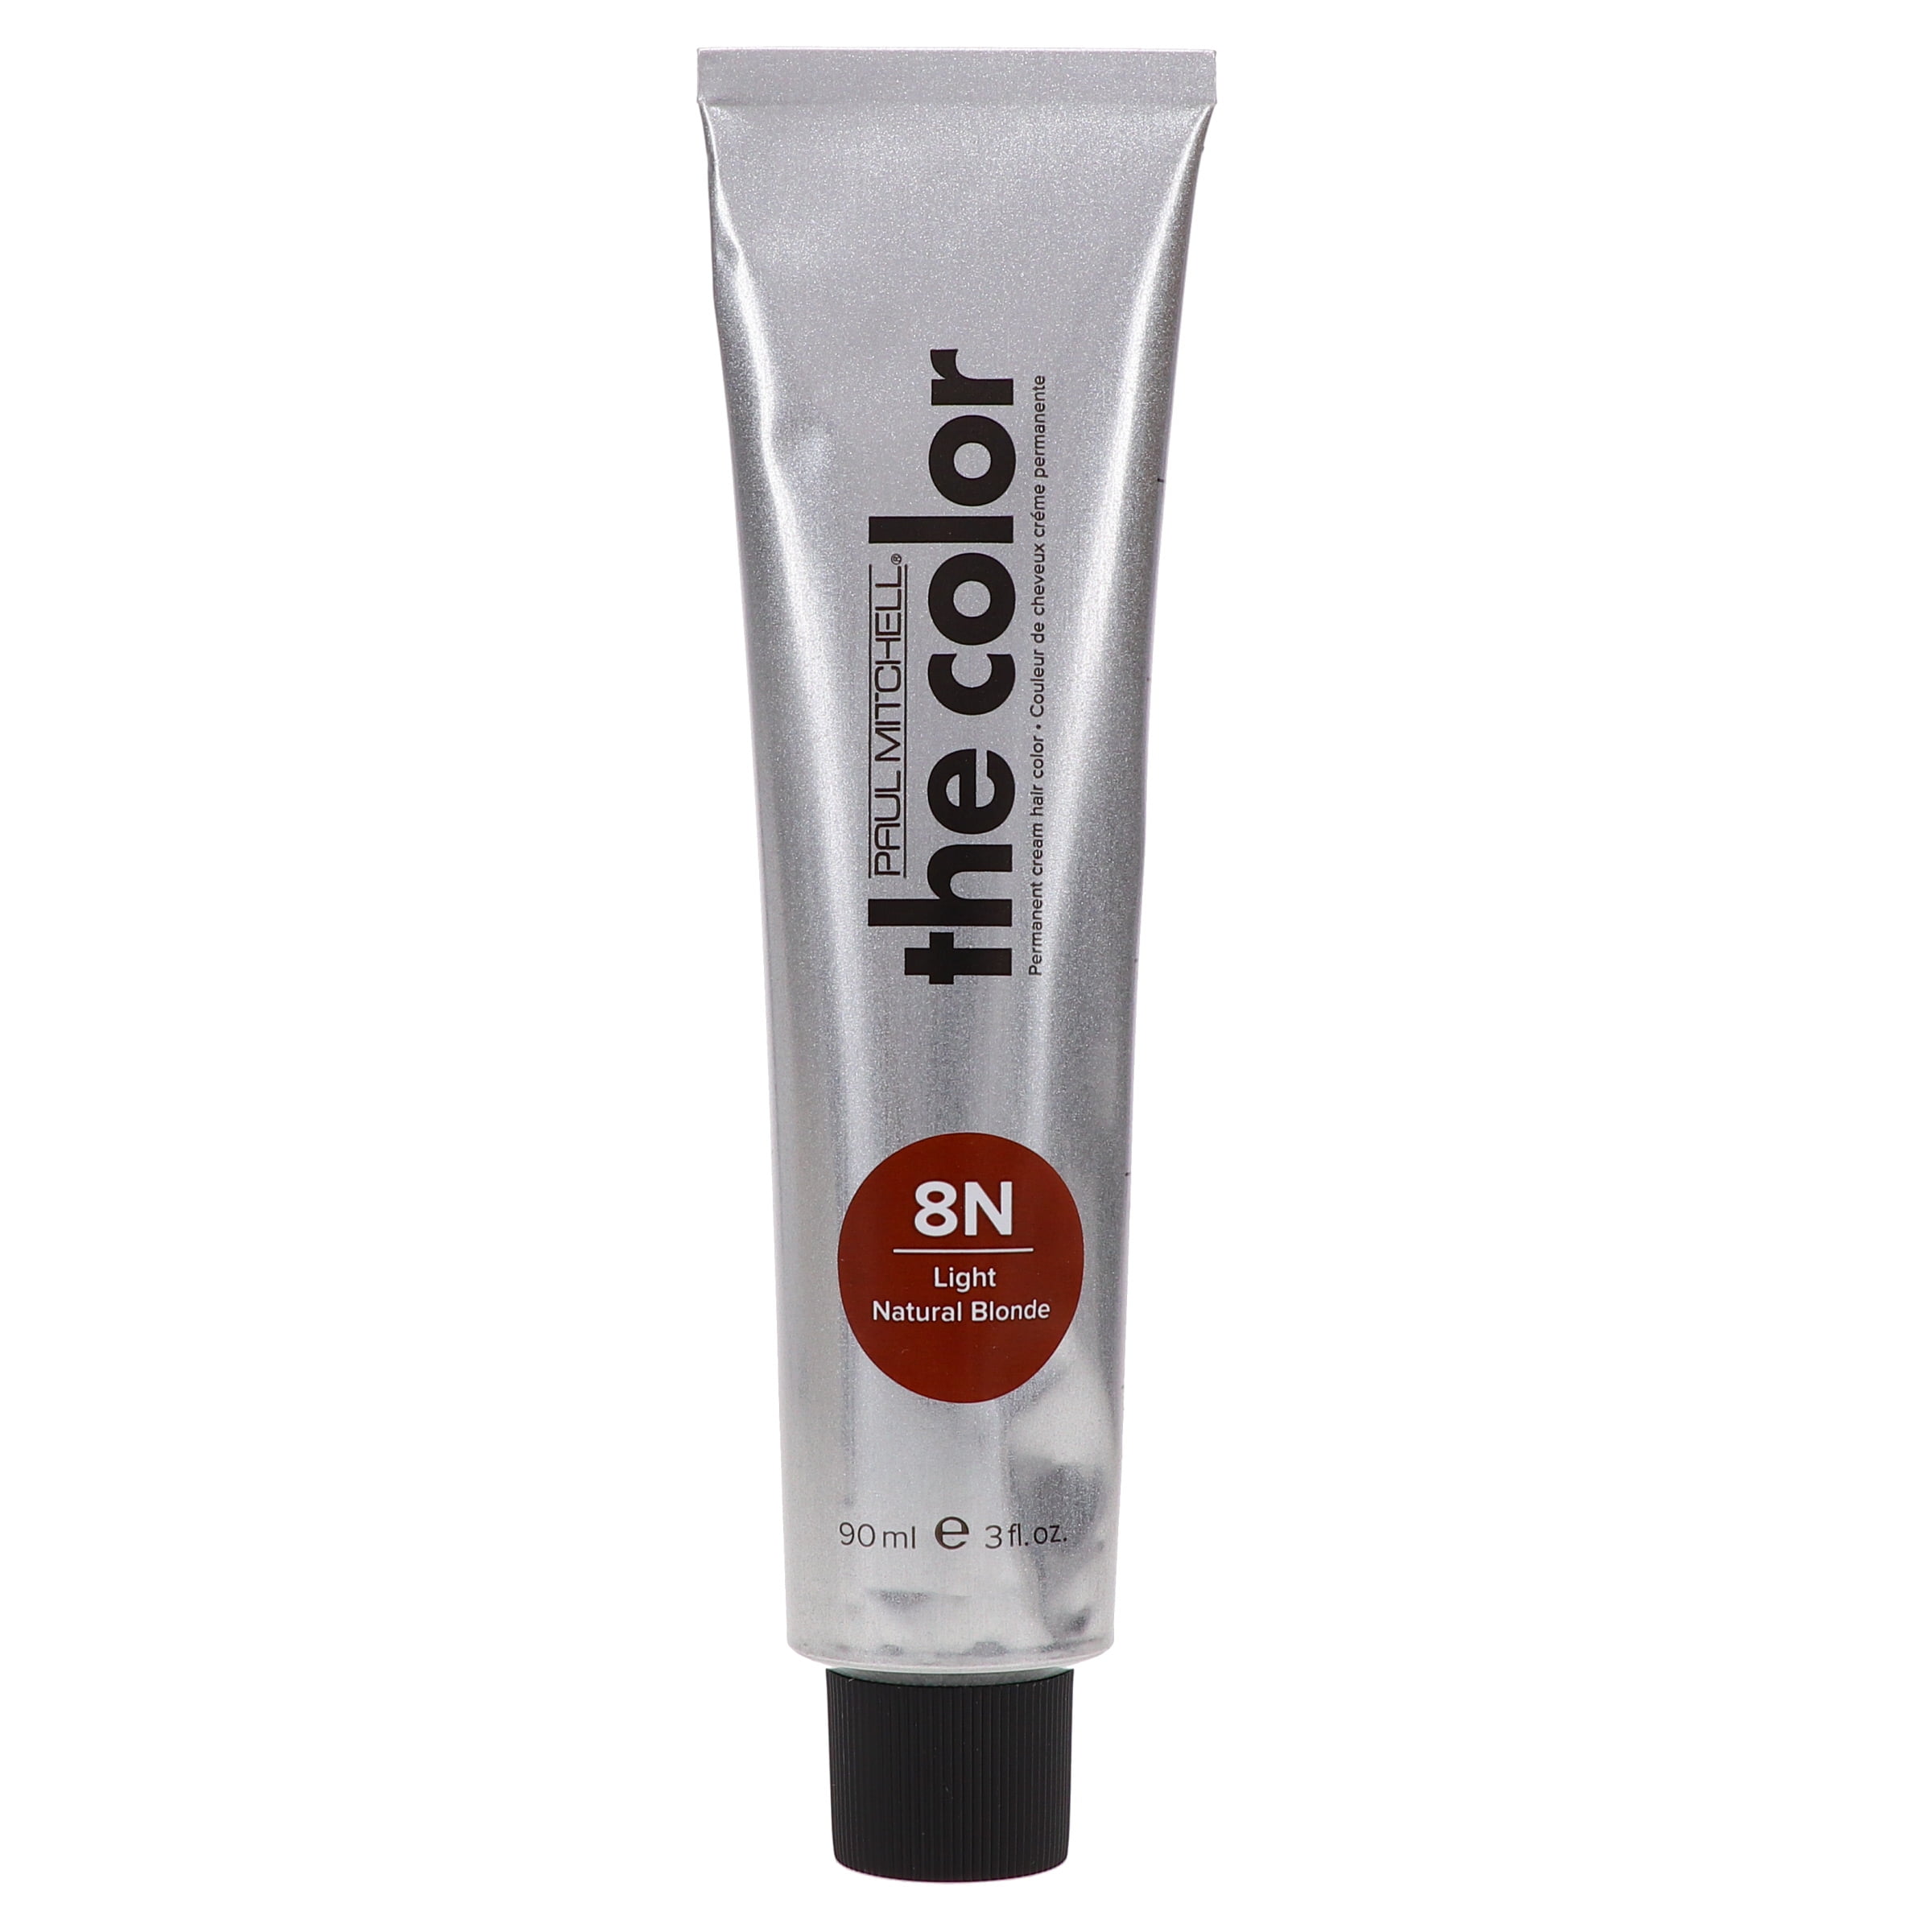 Paul Mitchell The Color Permanent Cream Hair Color 8N Light Natural ...